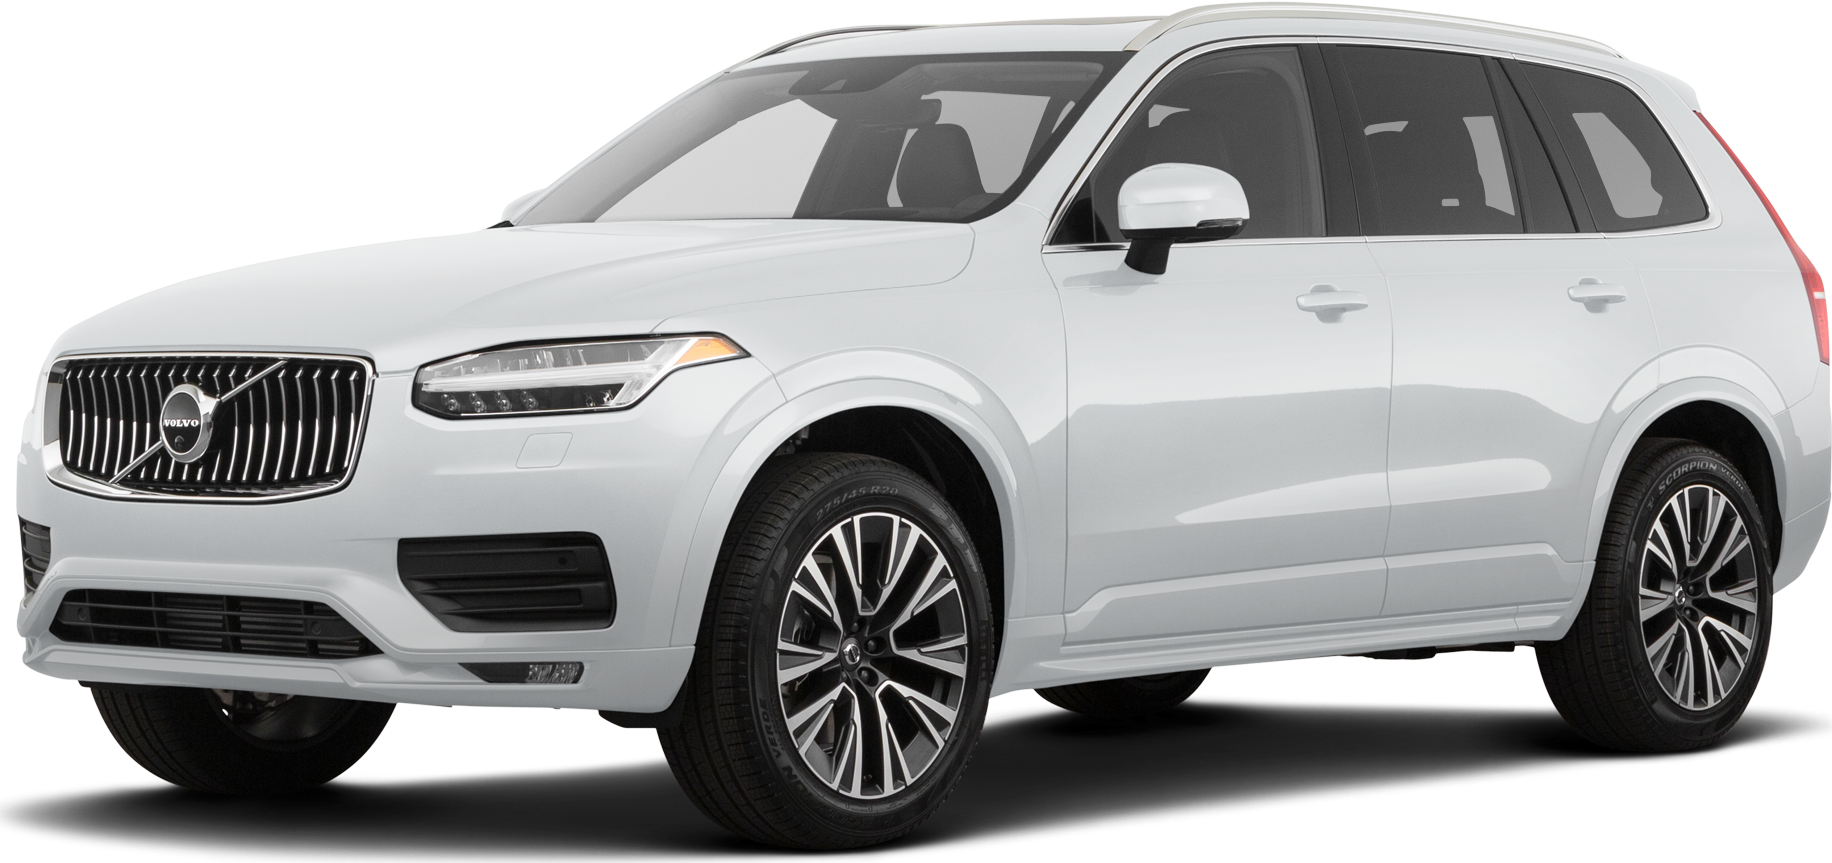 New 2021 Volvo XC90 Reviews, Pricing & Specs | Kelley Blue Book